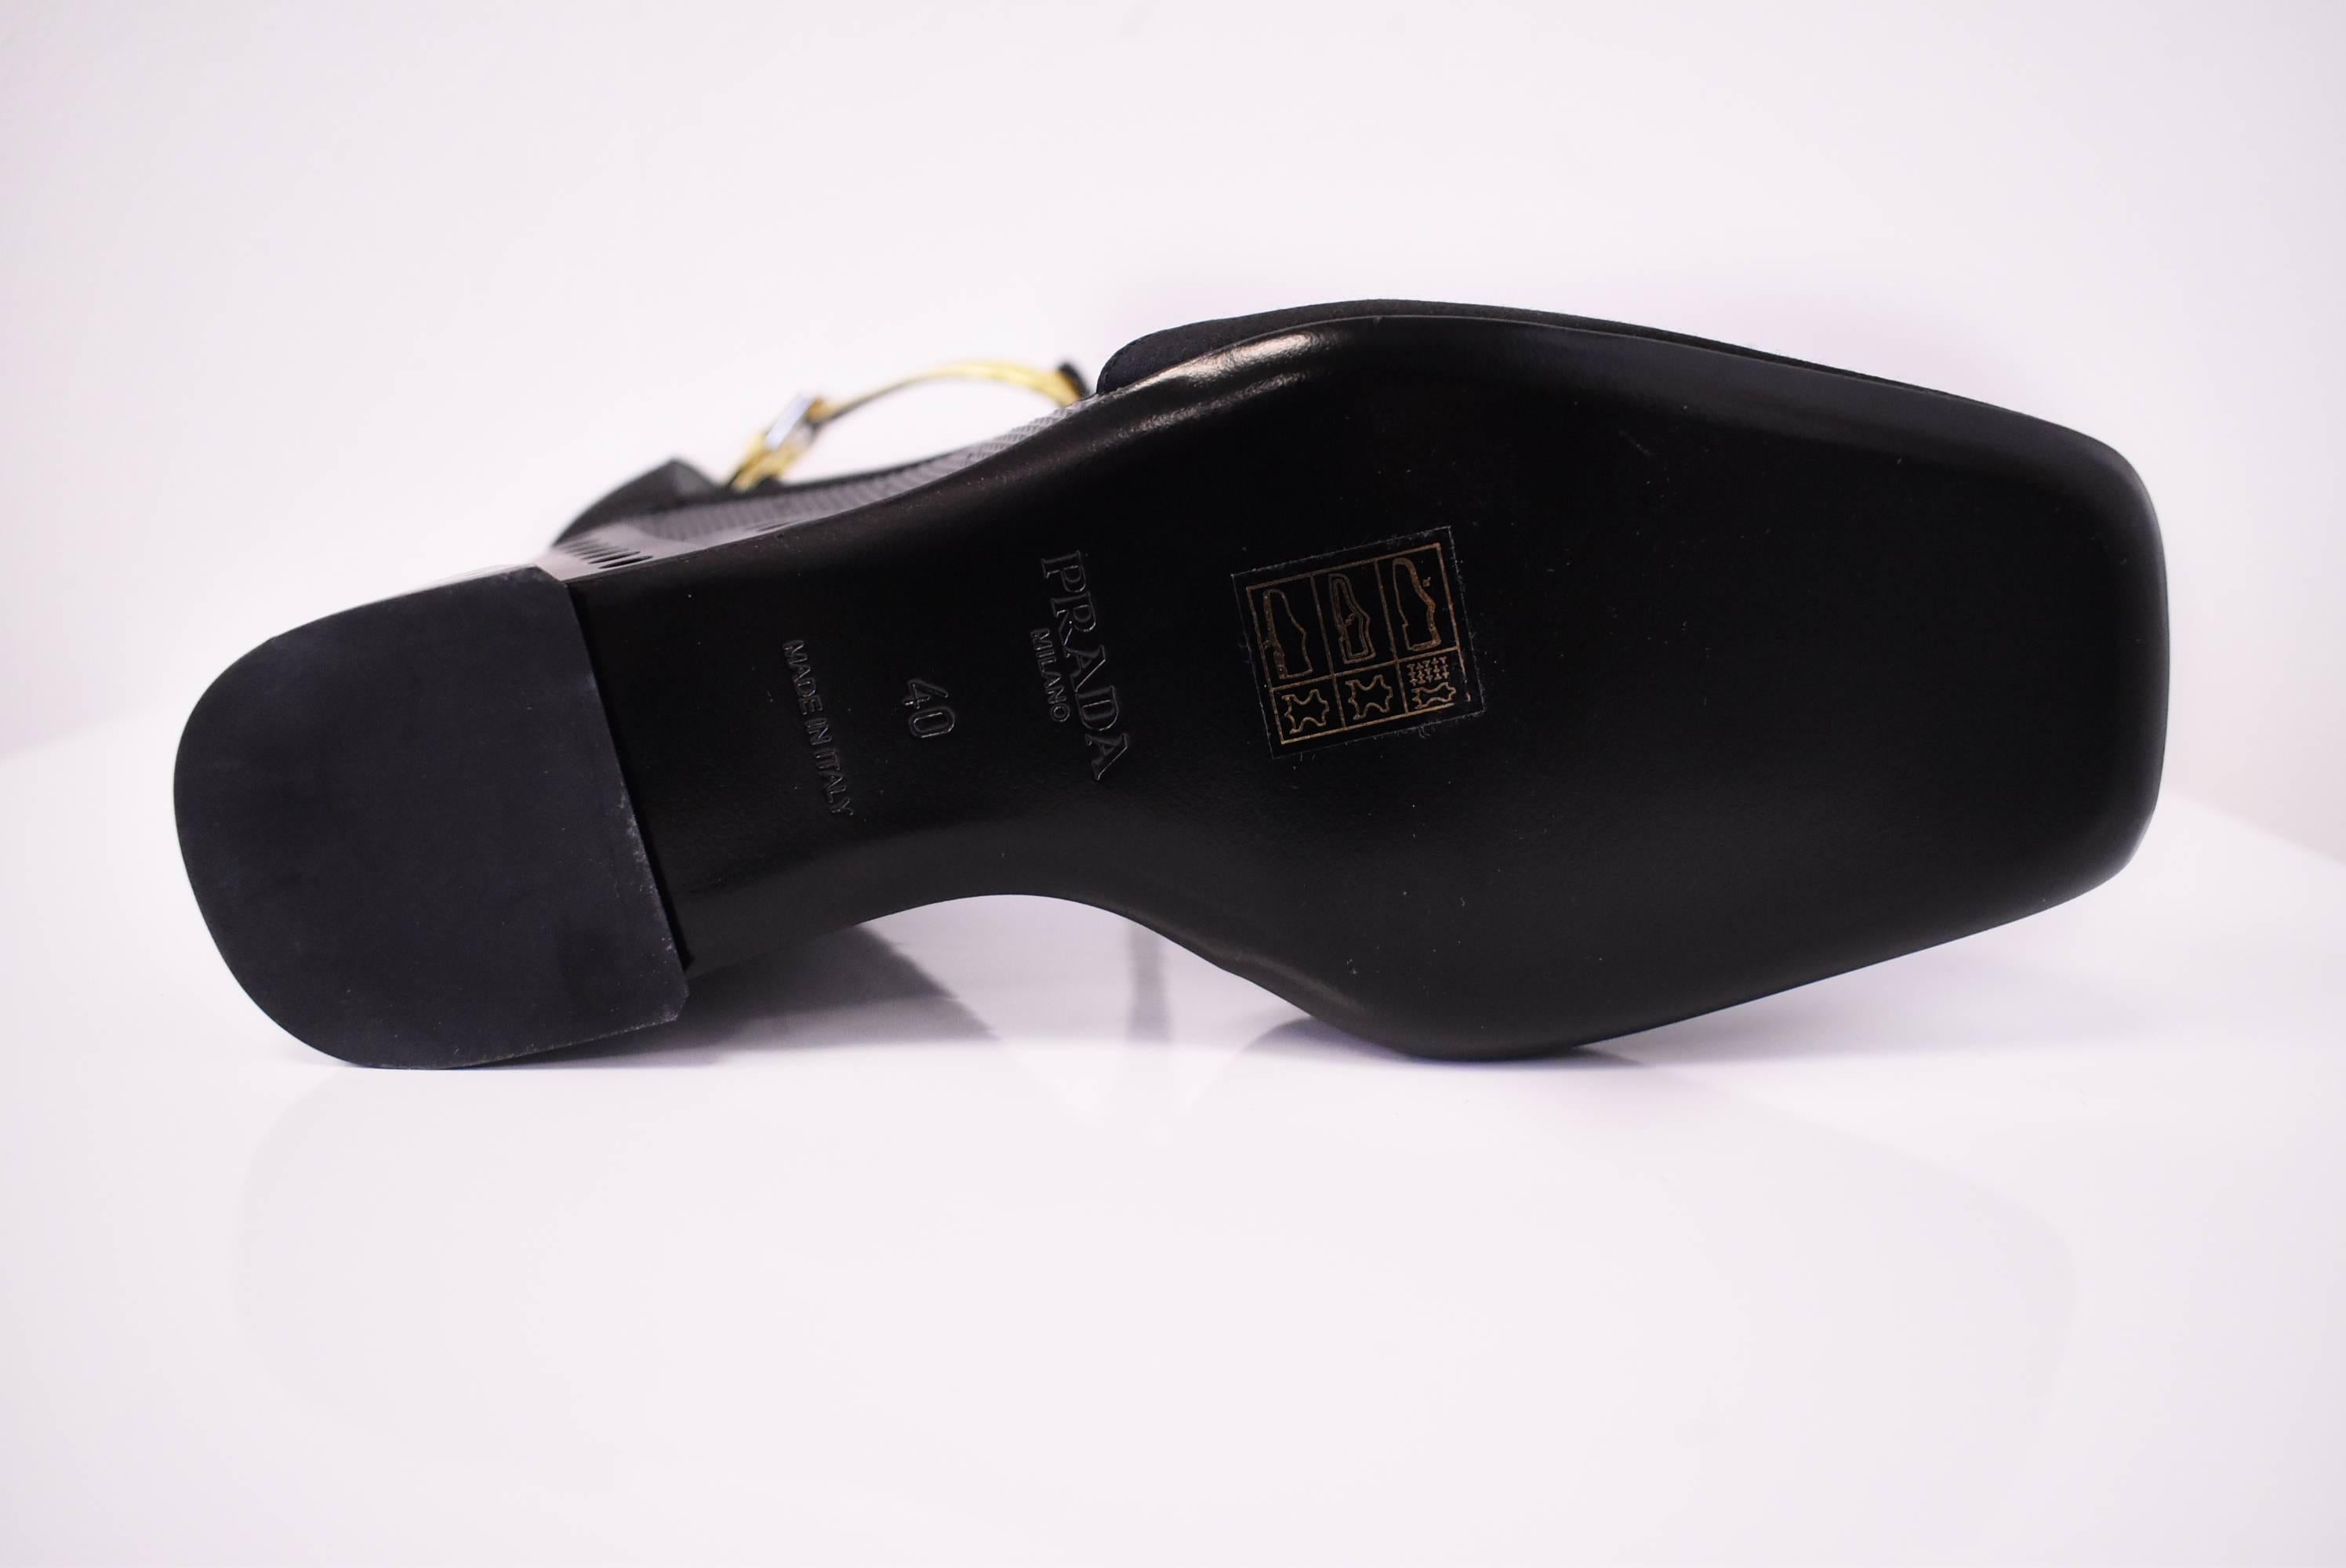 Prada Black Wedge Shoes with Gold Ankle Strap Unworn with Box and Dustbag A/W 14 For Sale 3